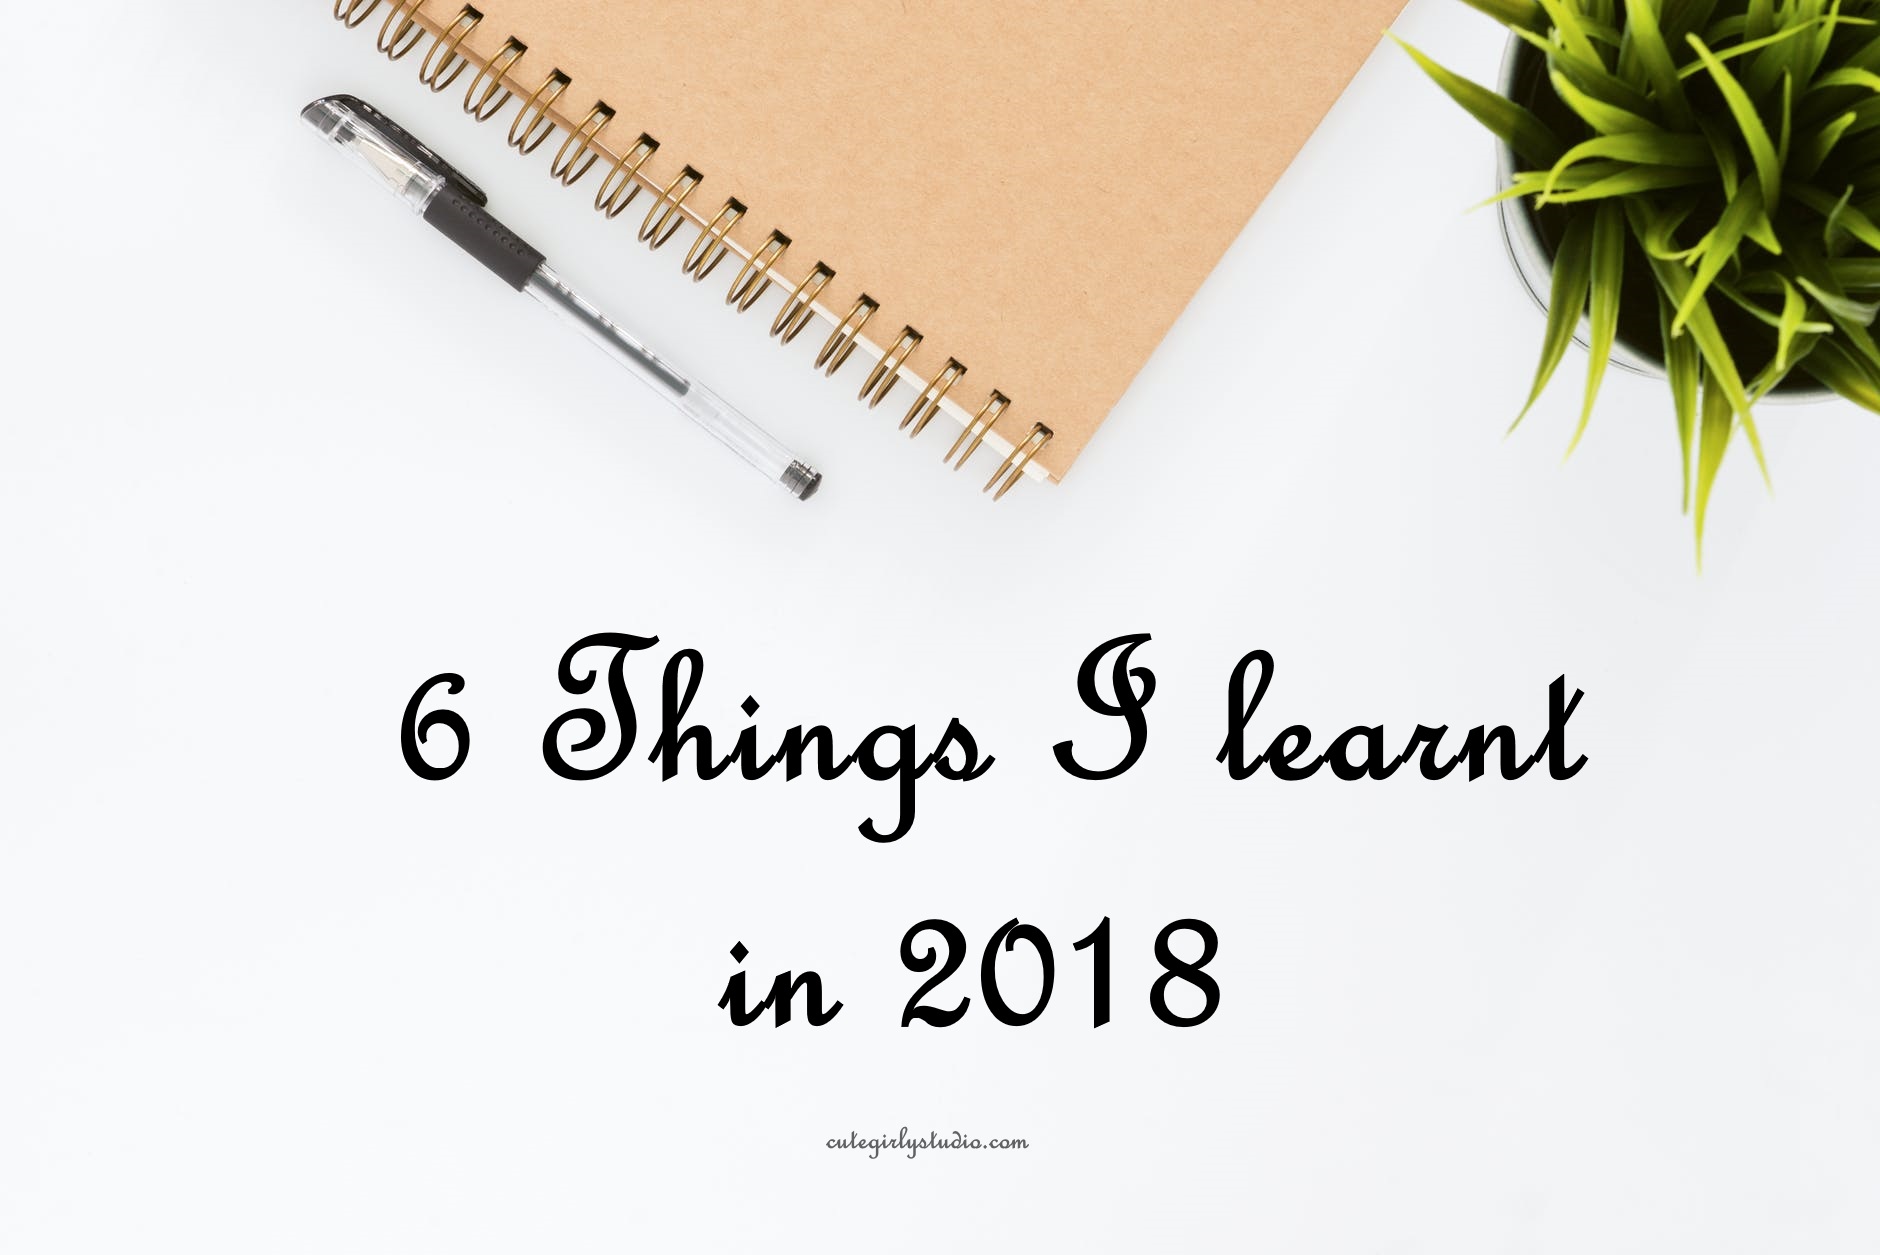 6 things I learn't in 2018